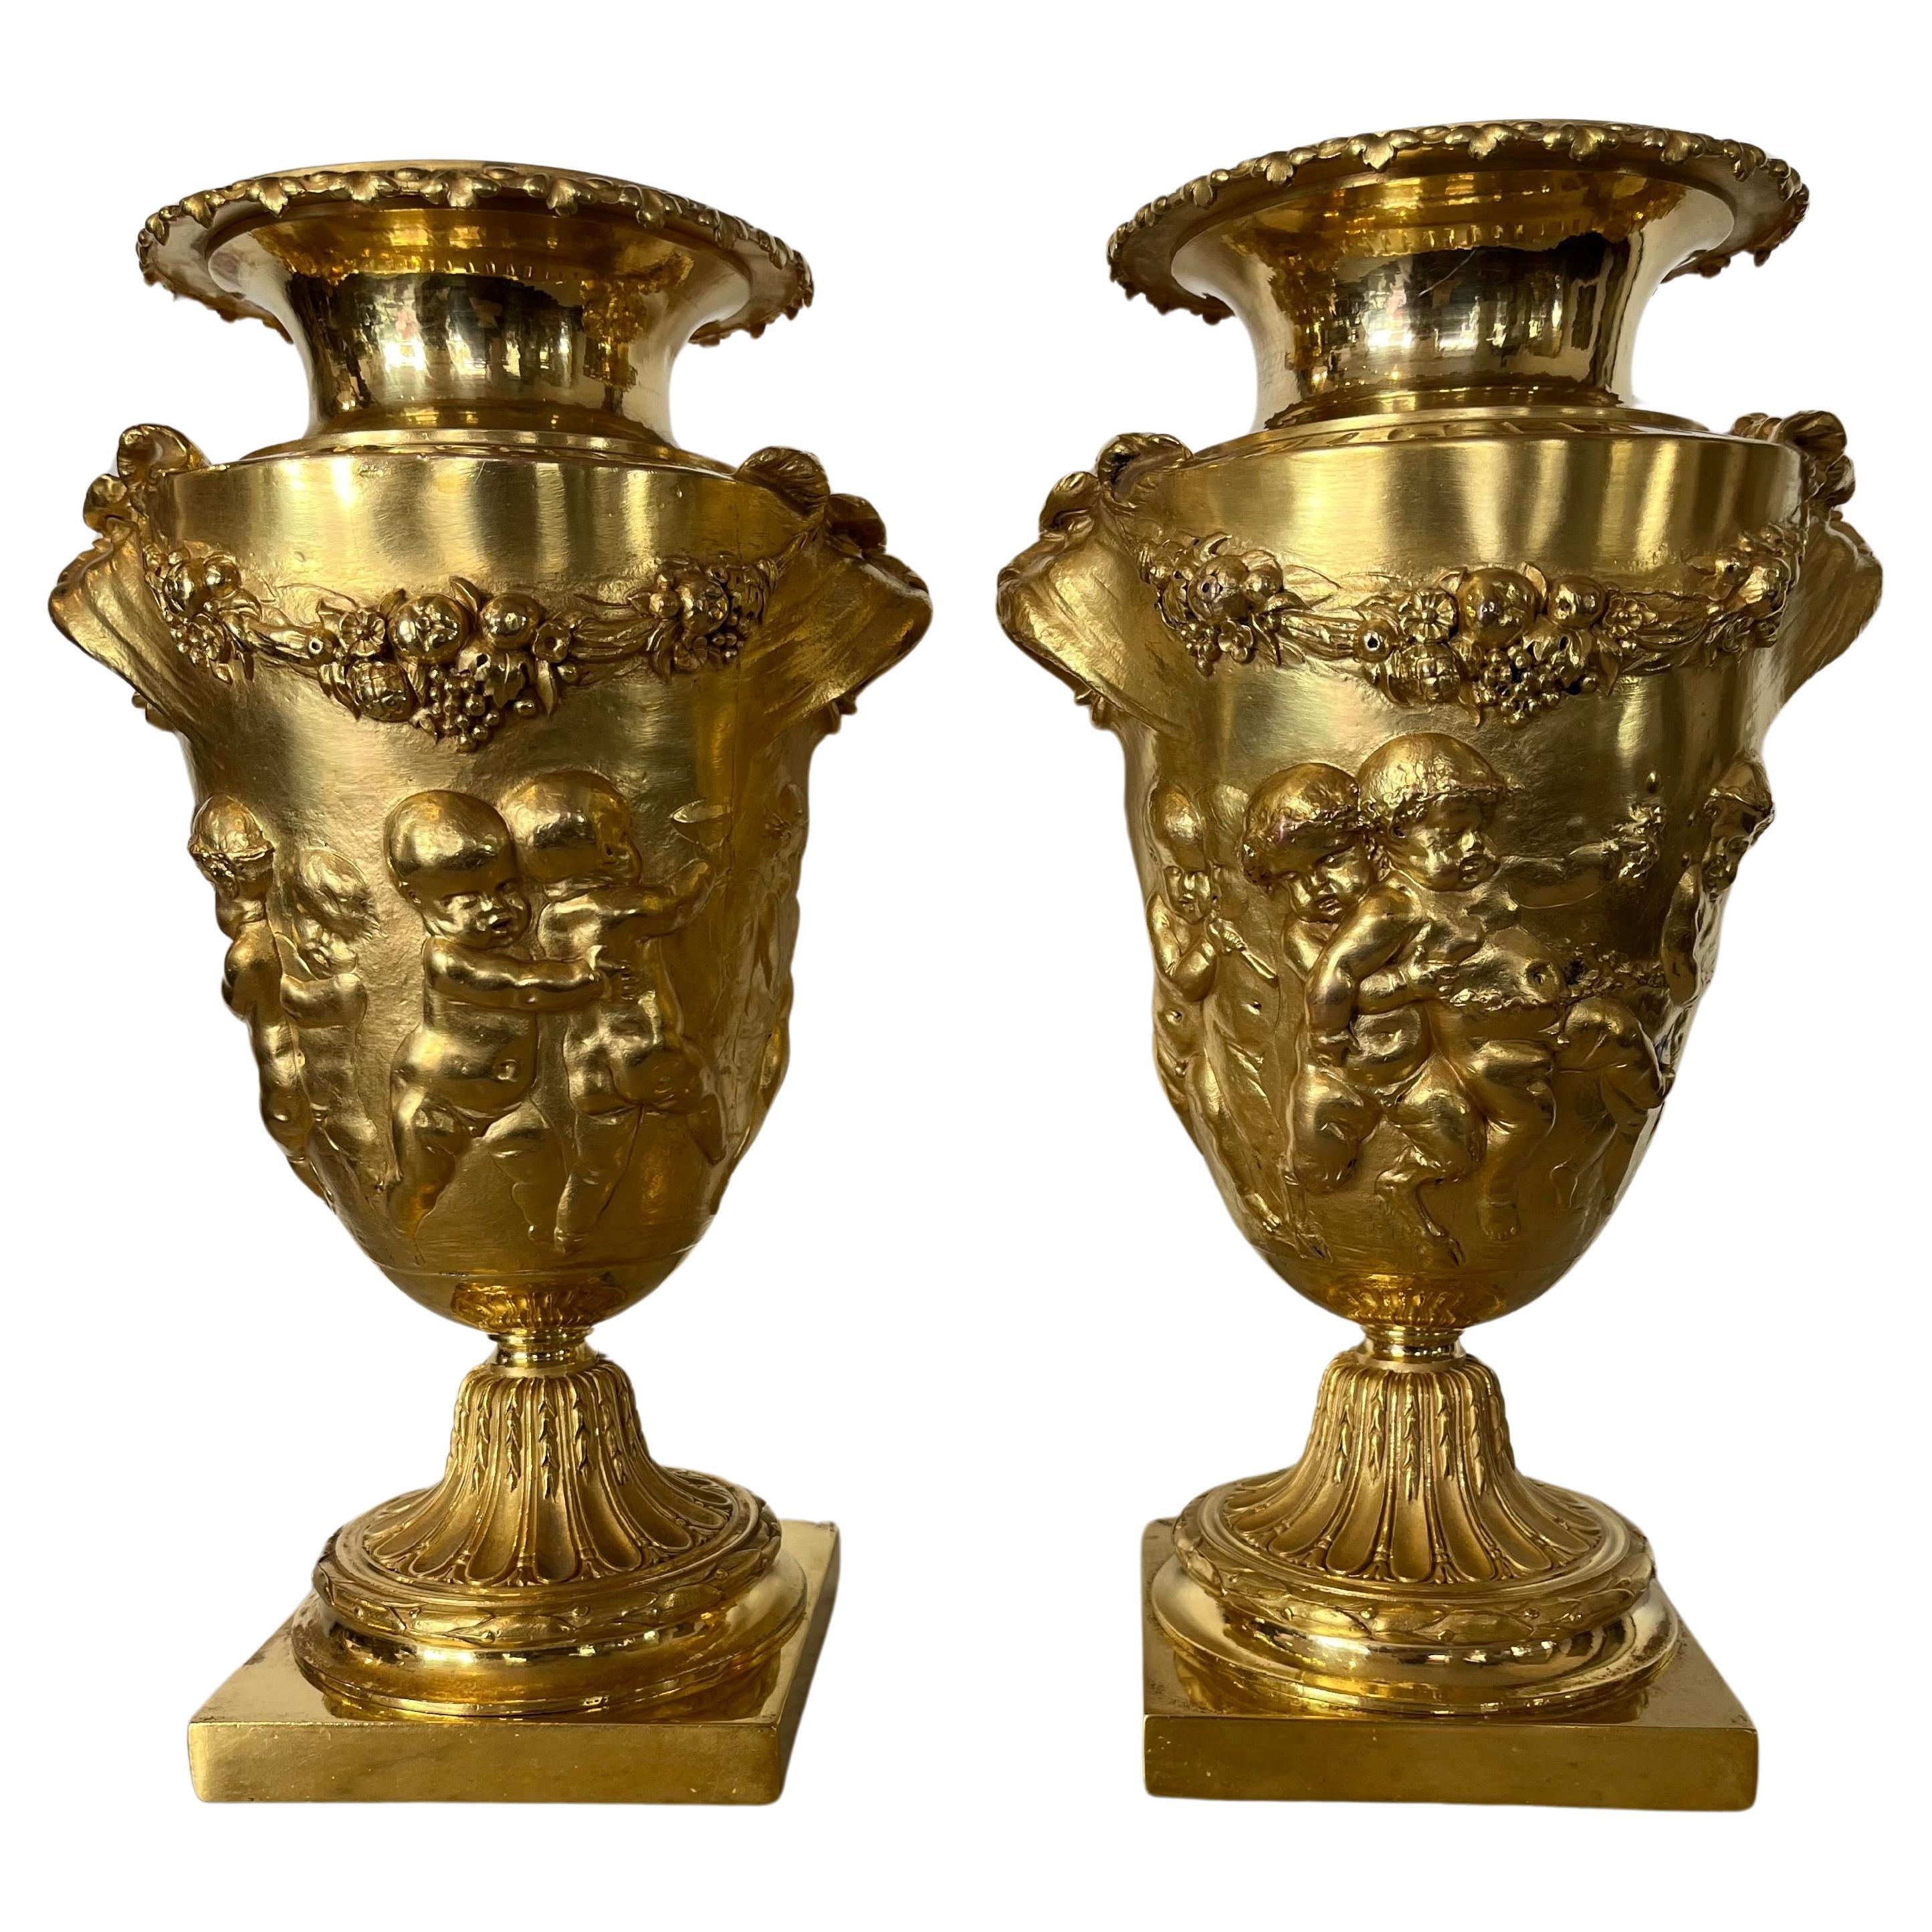 Pair Of Urns / Cassolettes - Gilt Bronze - (after Clodion) - France - 19th Centu For Sale